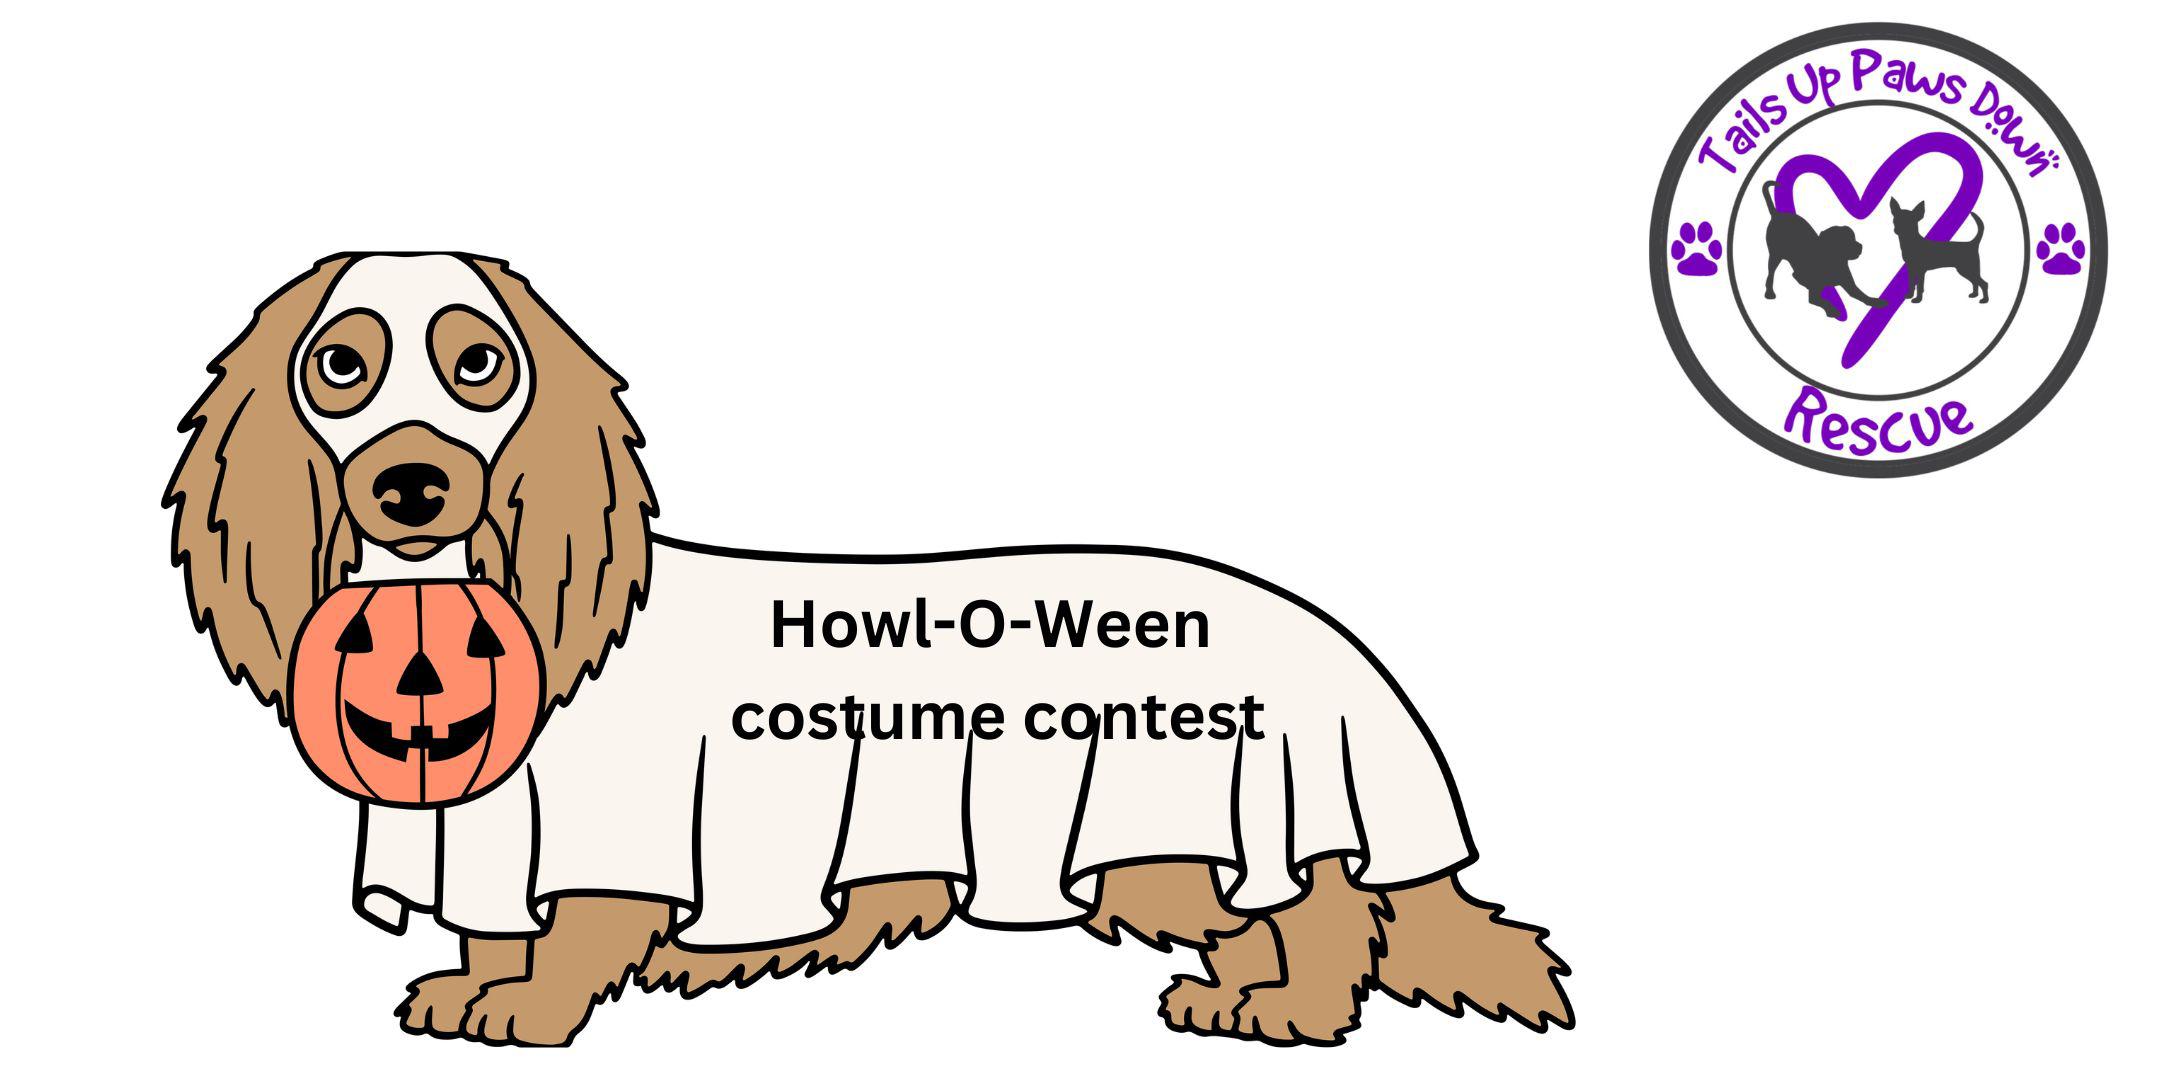 Howl-o-ween Pet Costume Contest